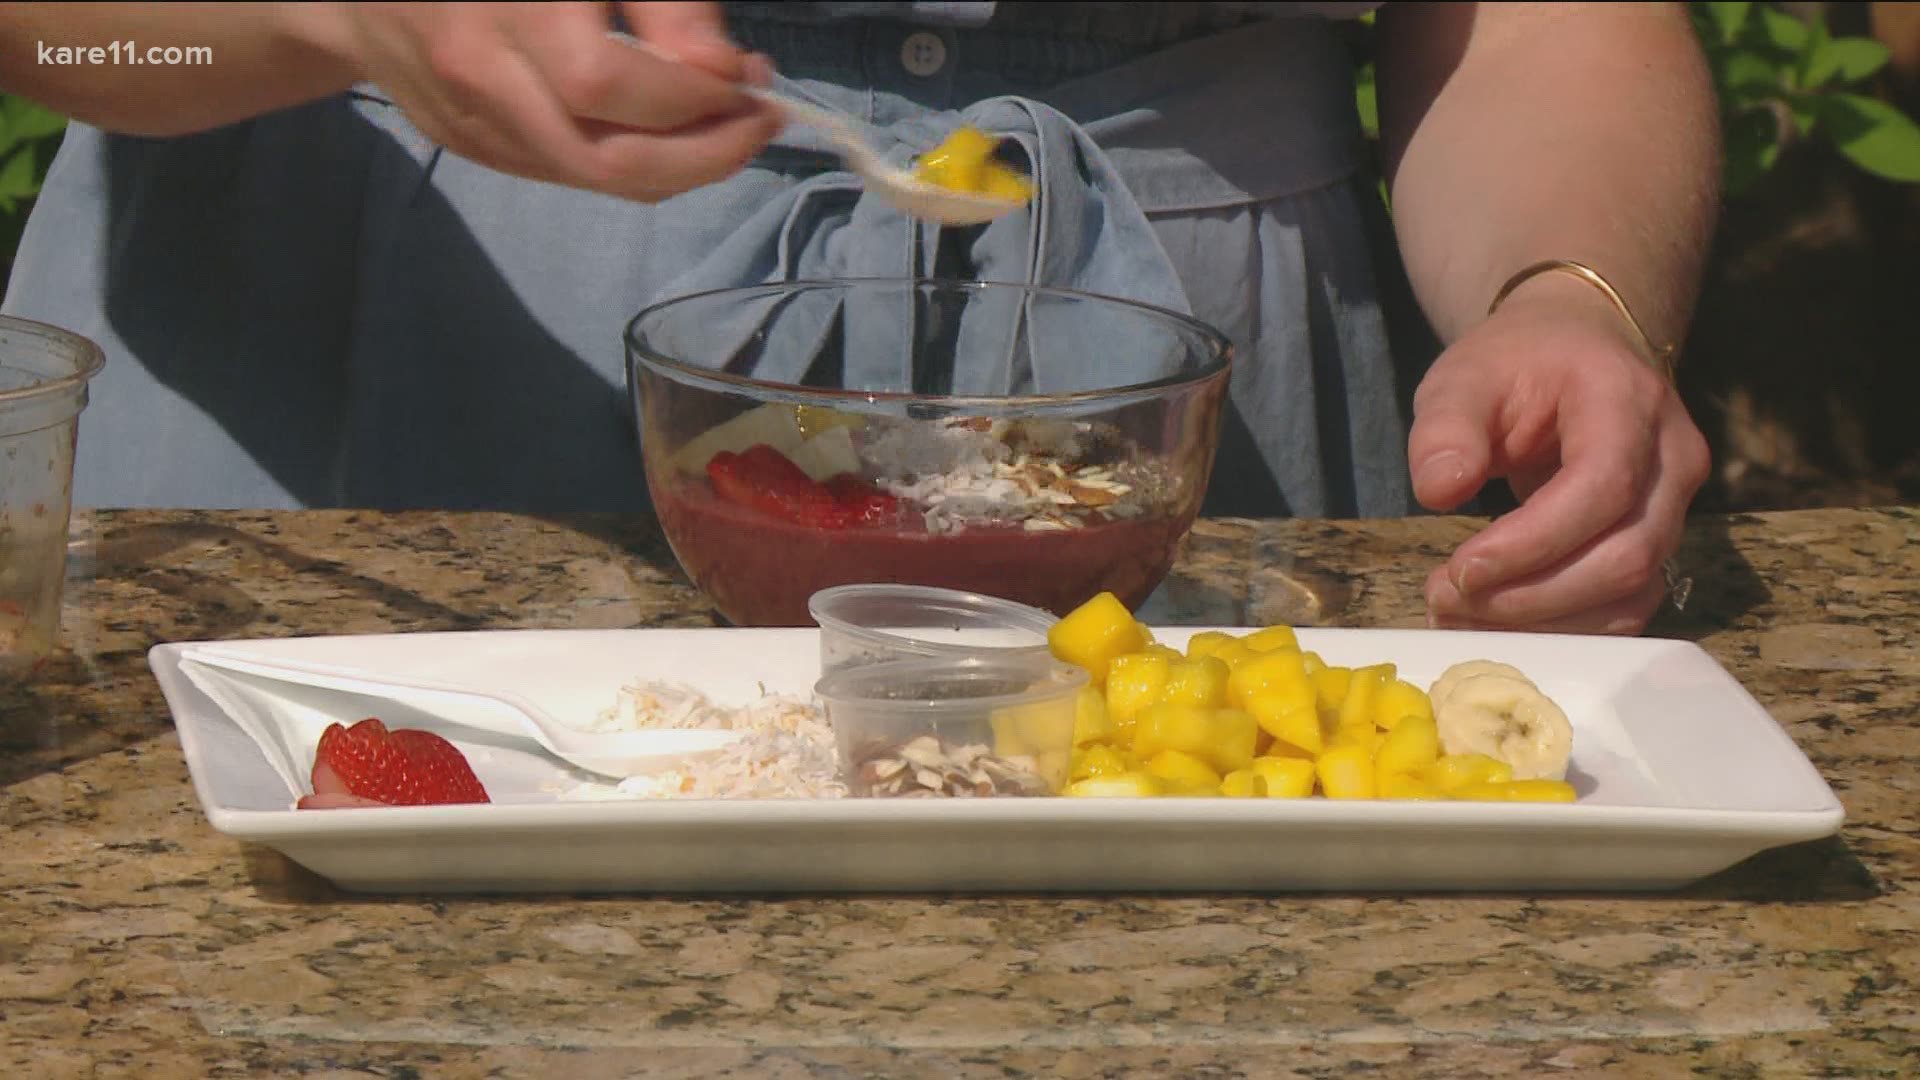 Get ready for summer with this fruity and healthy recipe from Hy-Vee.